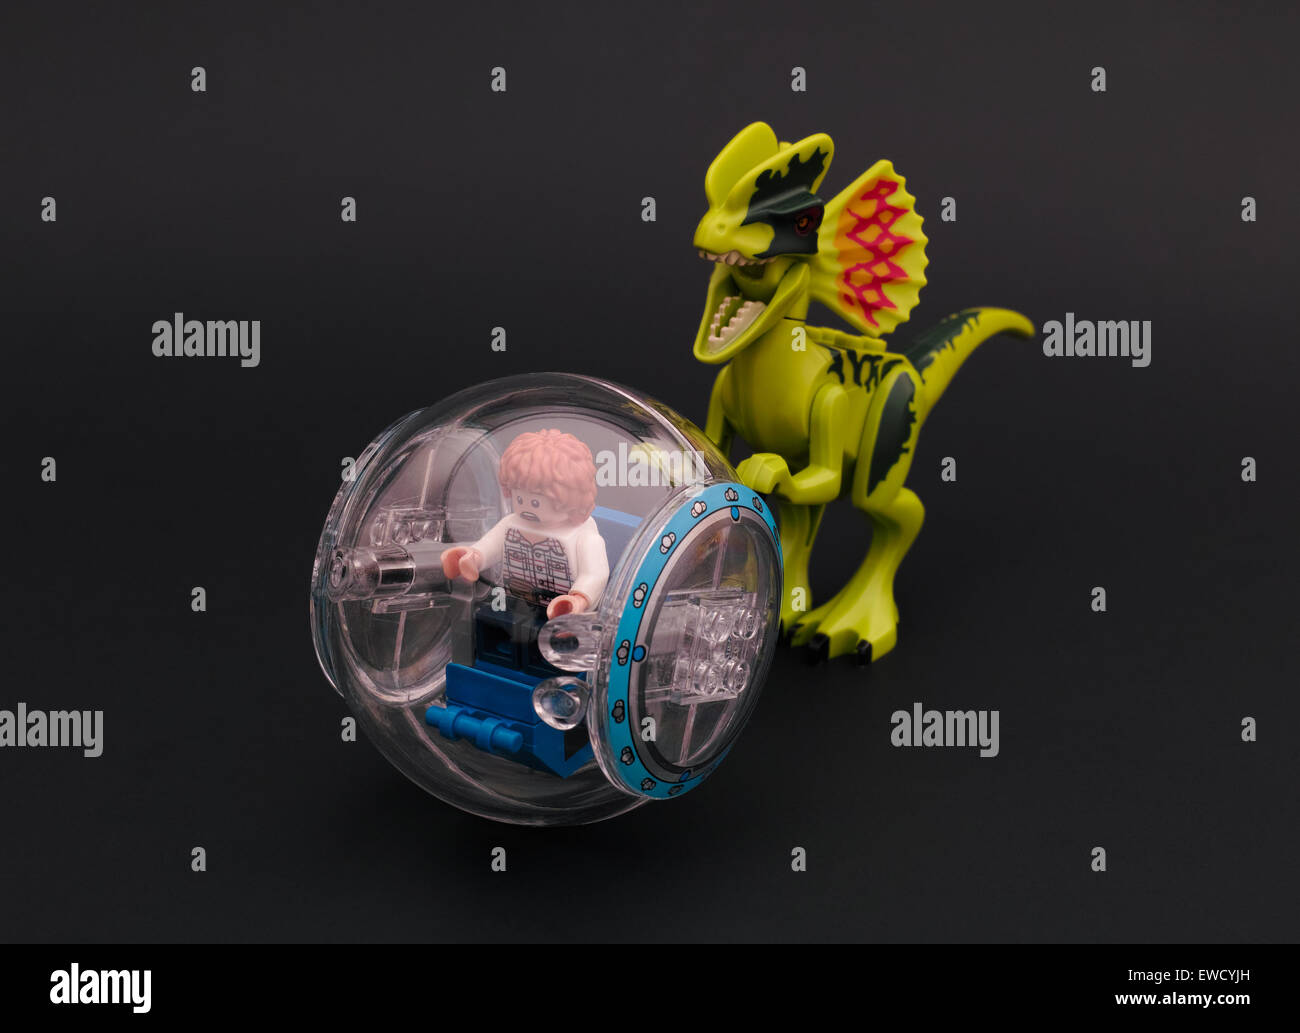 Tambov, Russian Federation - June 23, 2015 Lego Jurassic park. Gray minifigure in a gyrosphere being chased by a dilophosaurus. Stock Photo